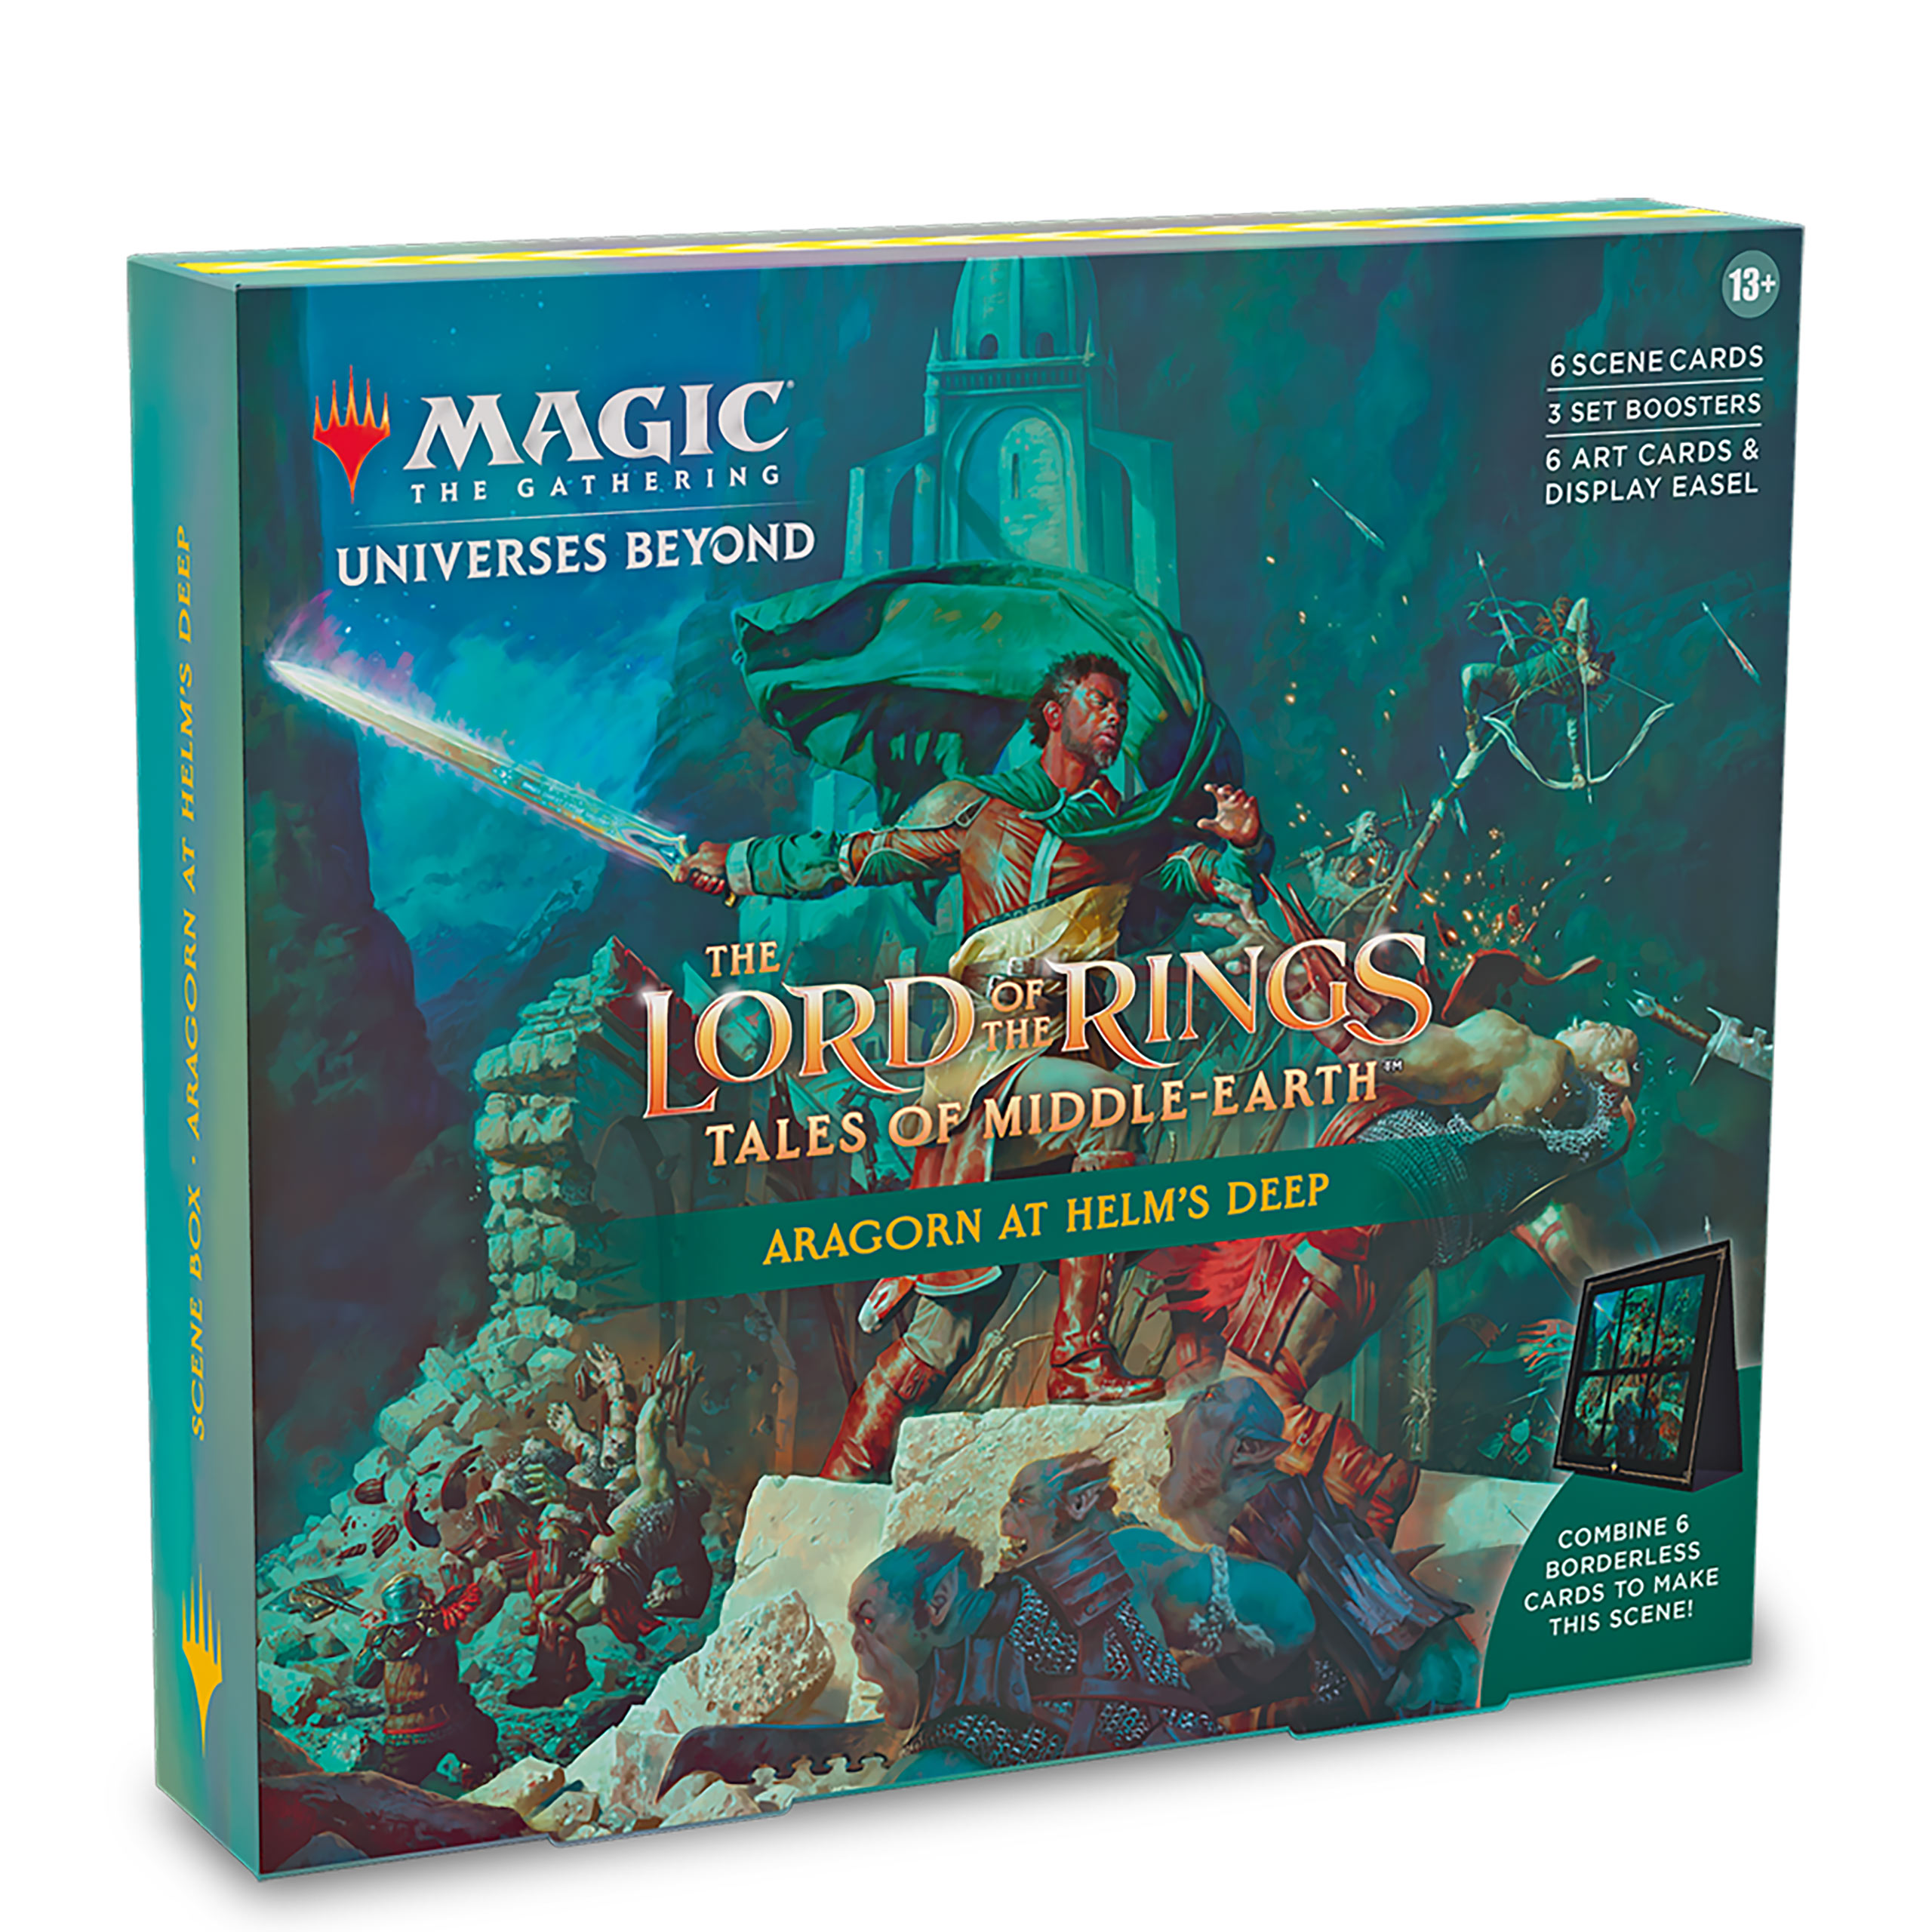 Heer der Ringen Tales of Middle-Earth - Aragorn At Helm's Deep Character Box - Magic The Gathering